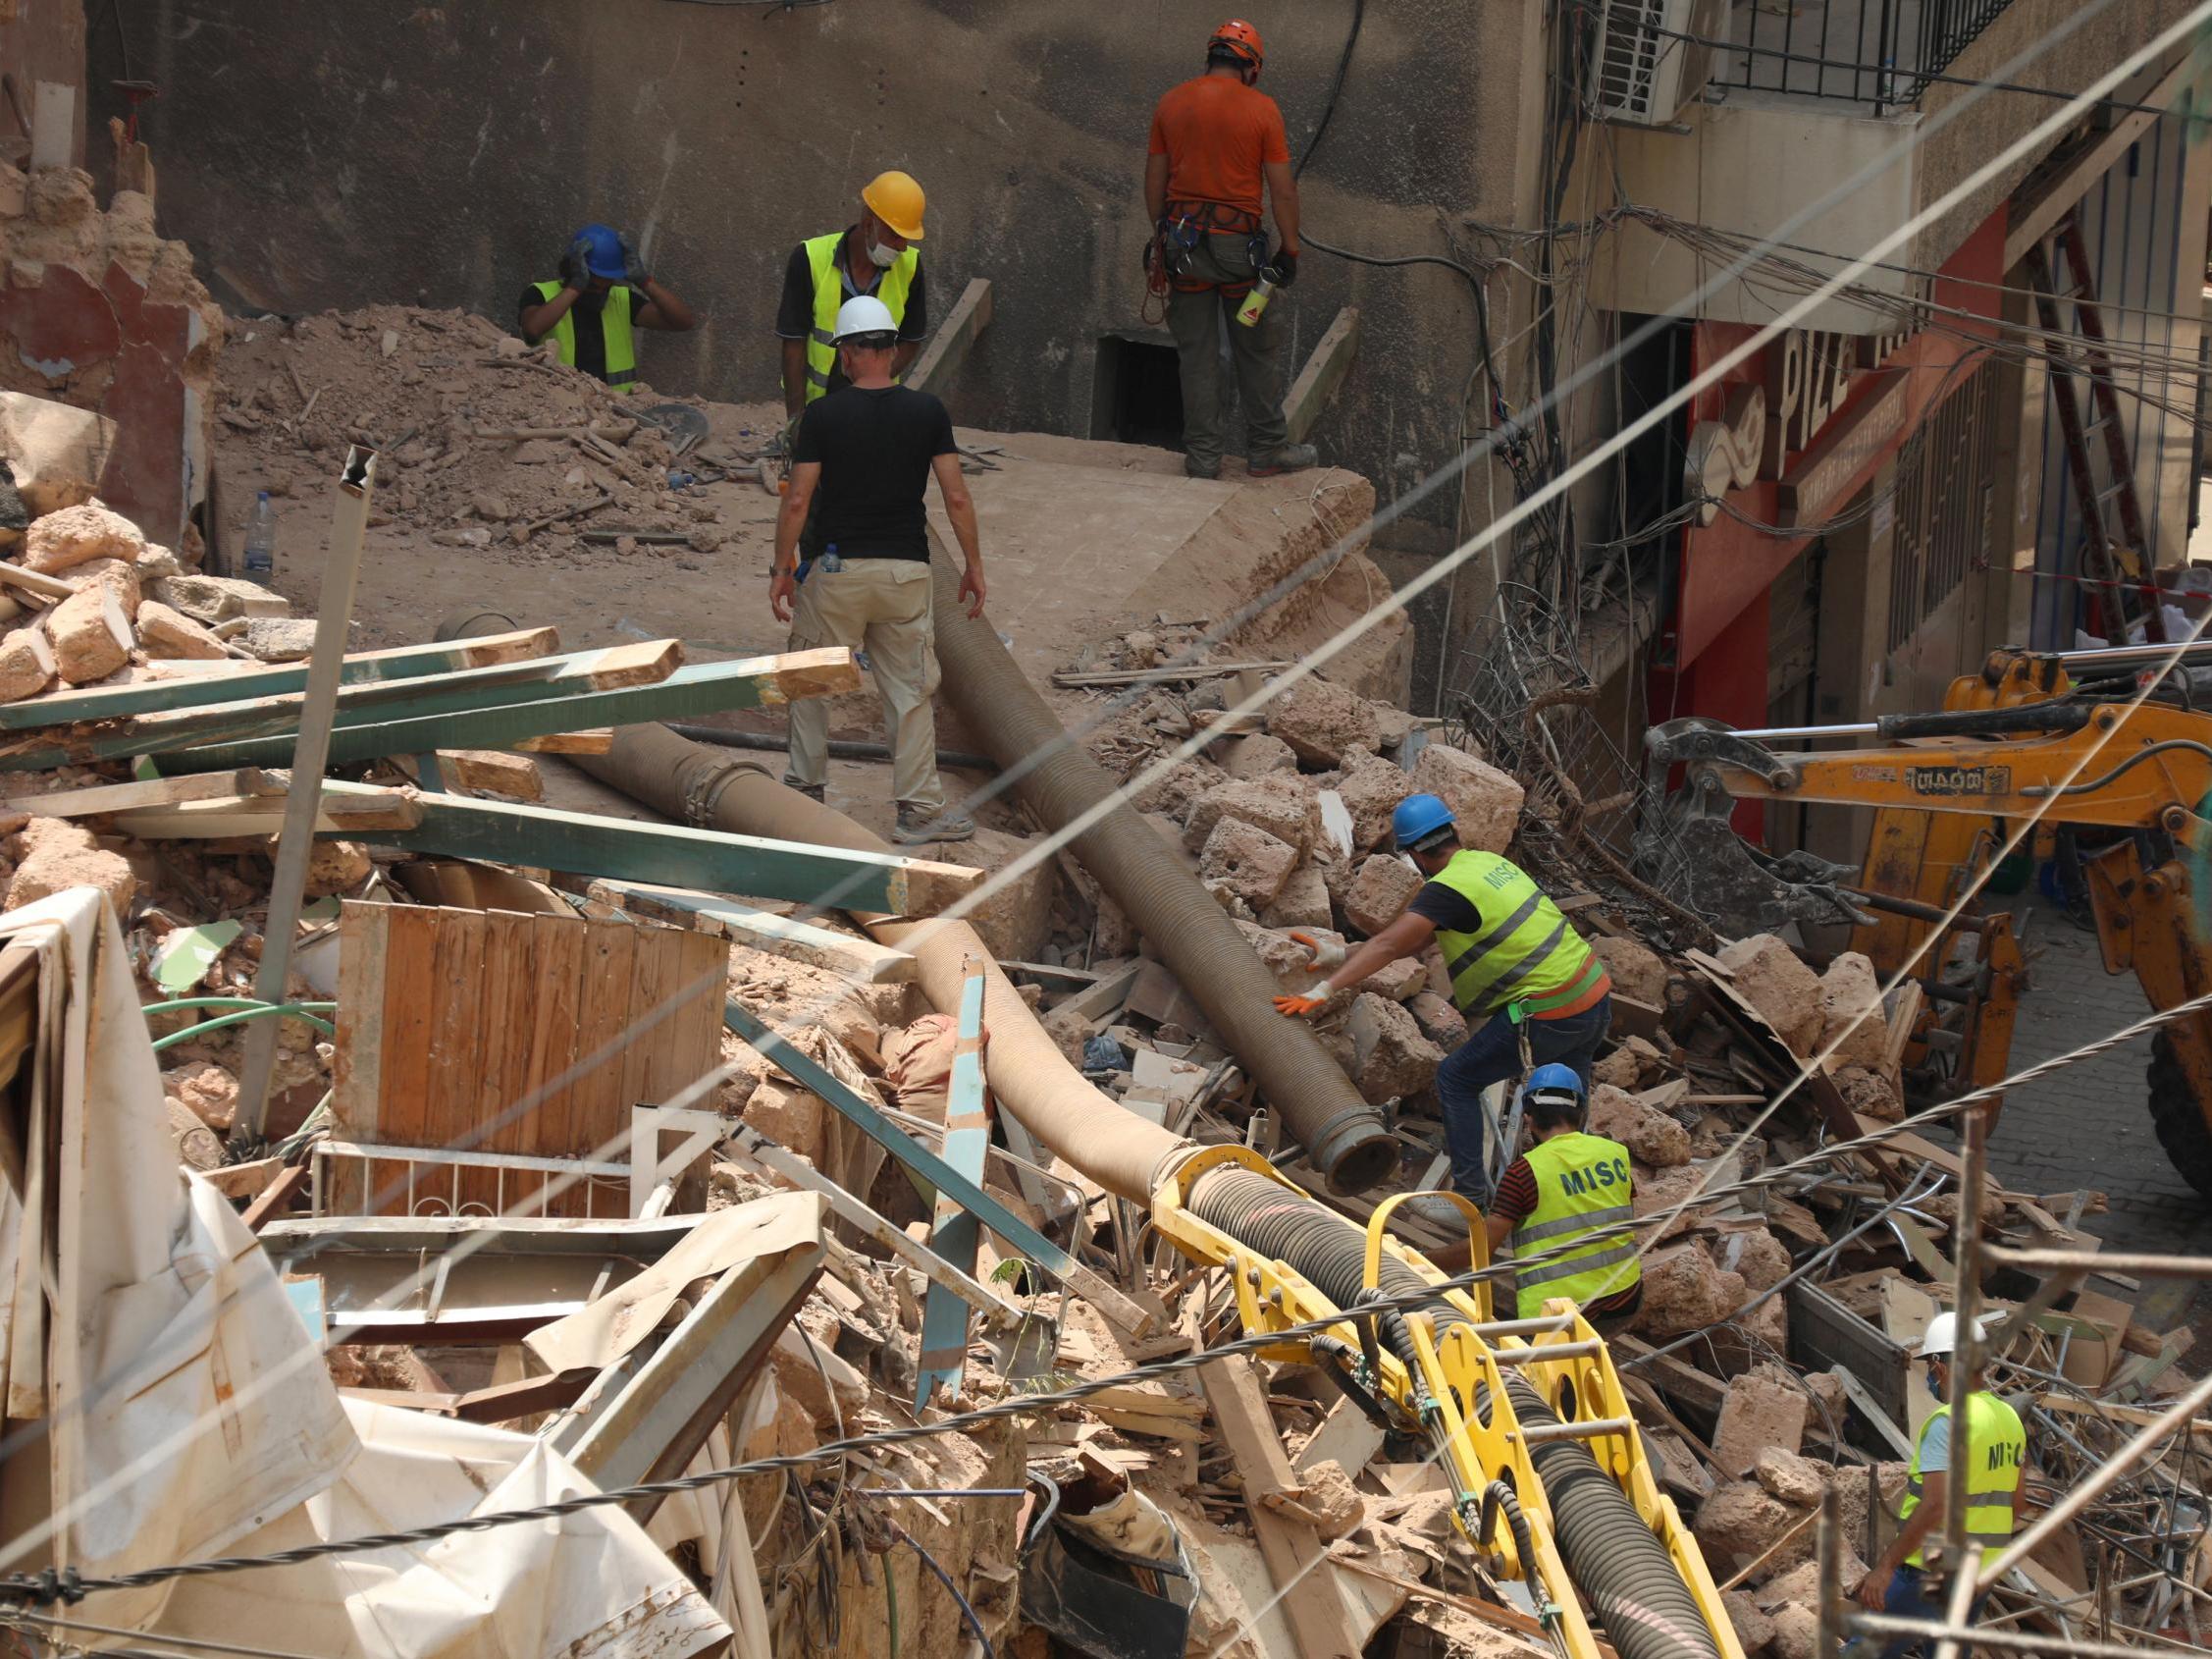 Search teams look for survivors in the rubble of a building destroyed in the Beirut blast